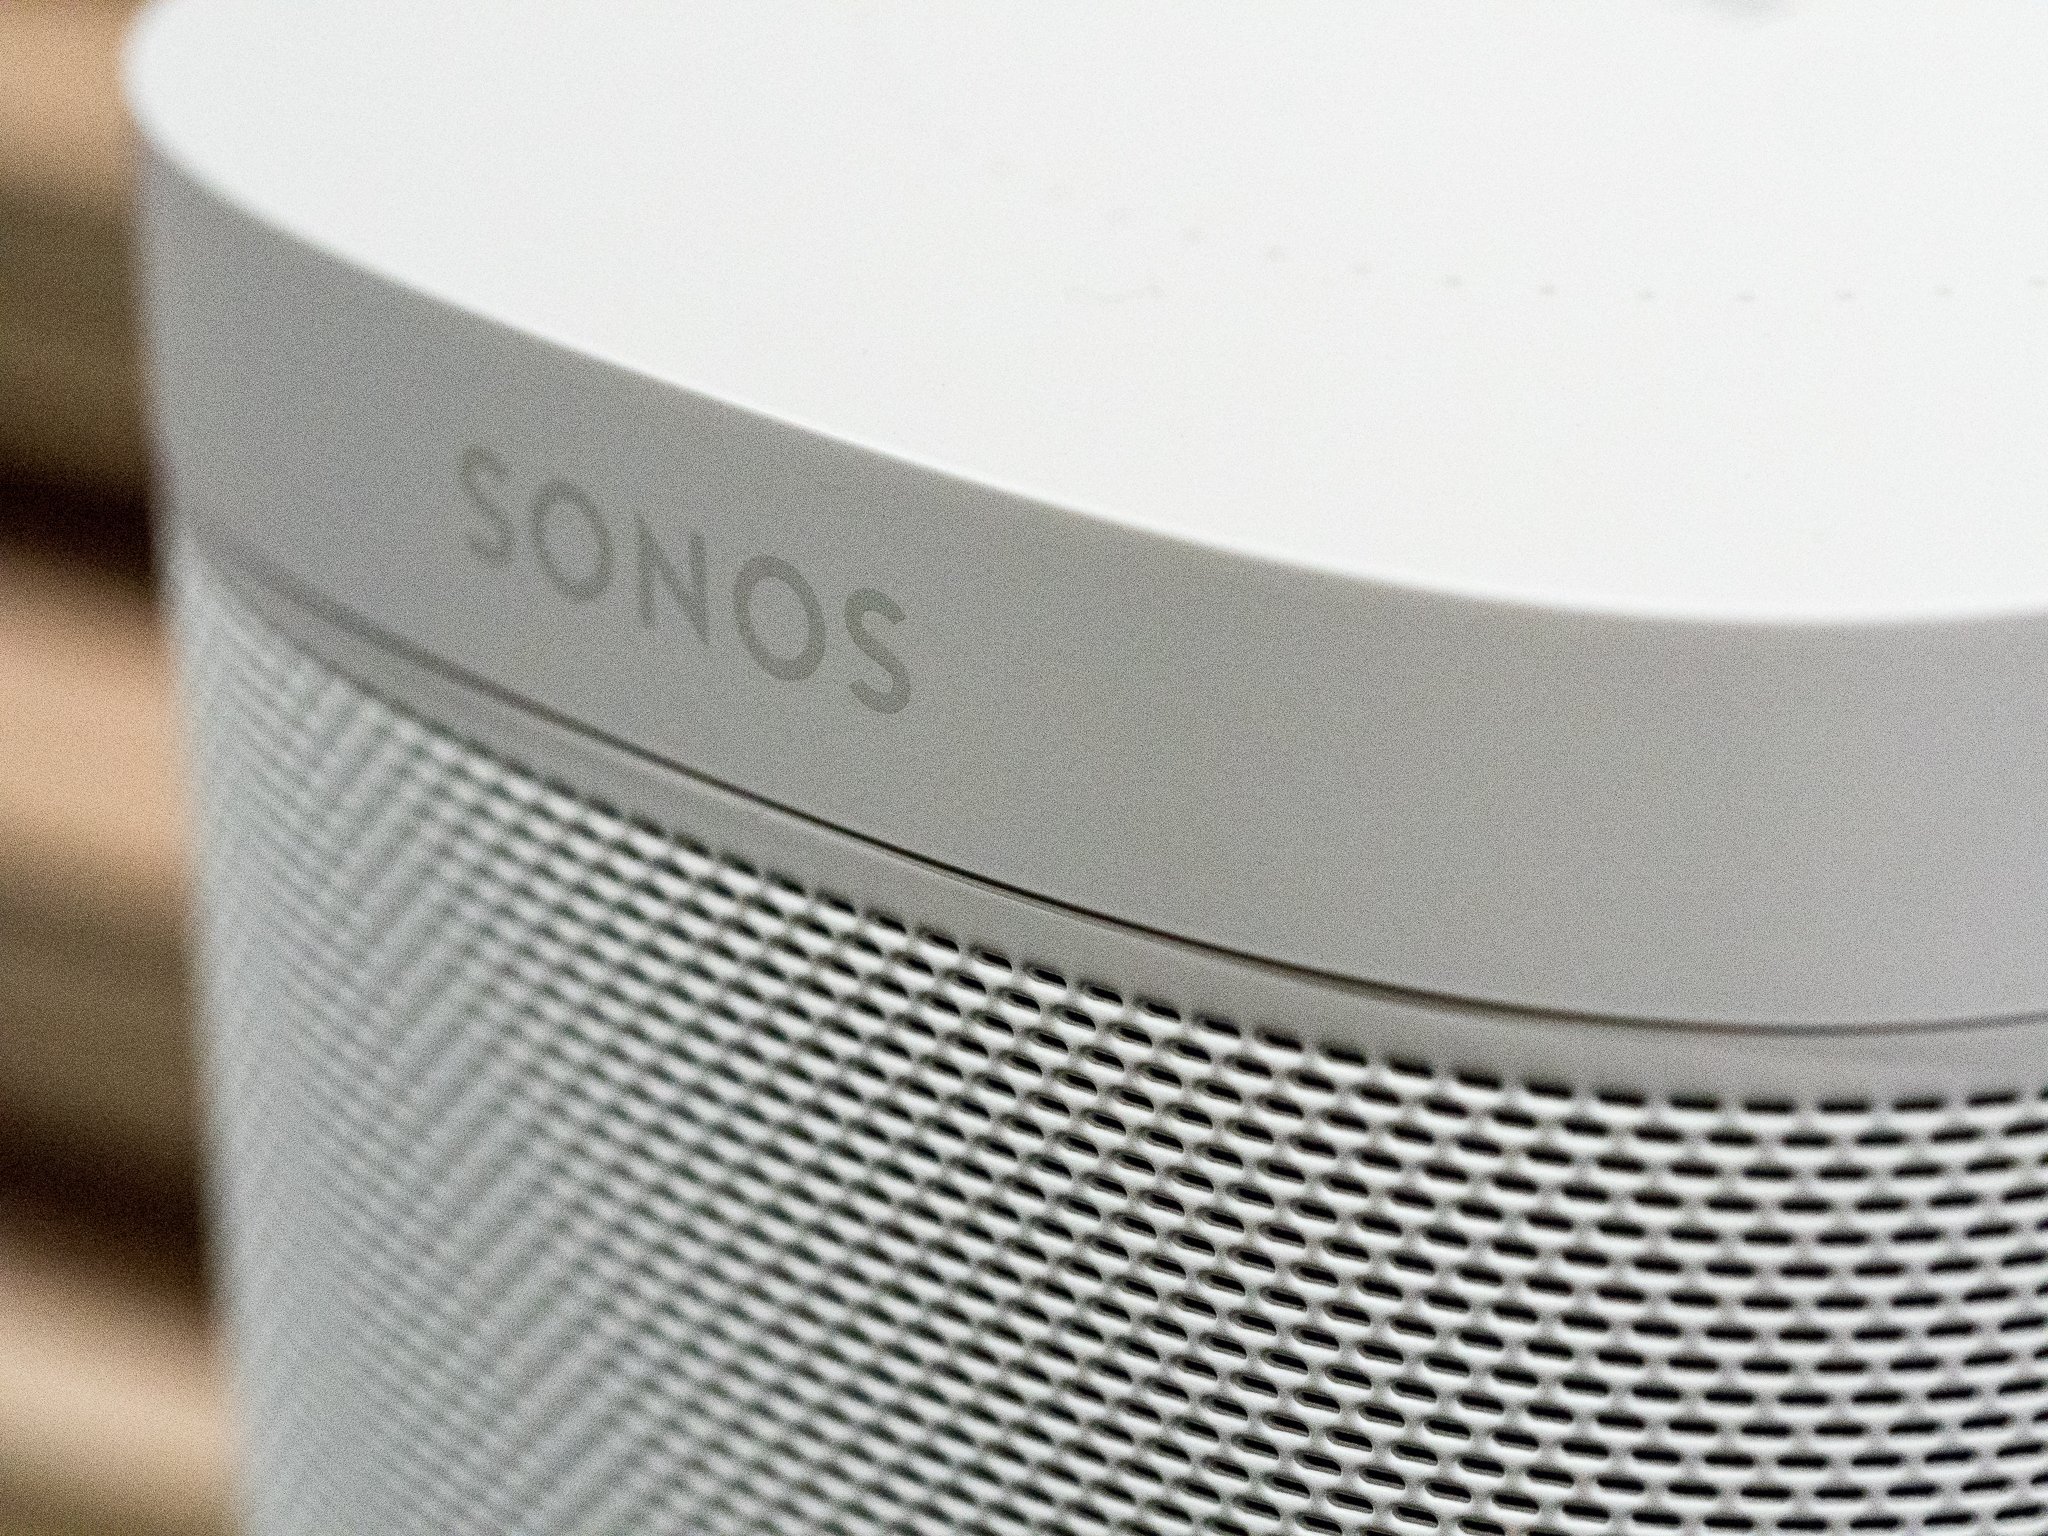 Sonos S2 launches this June with better audio quality and new features thumbnail